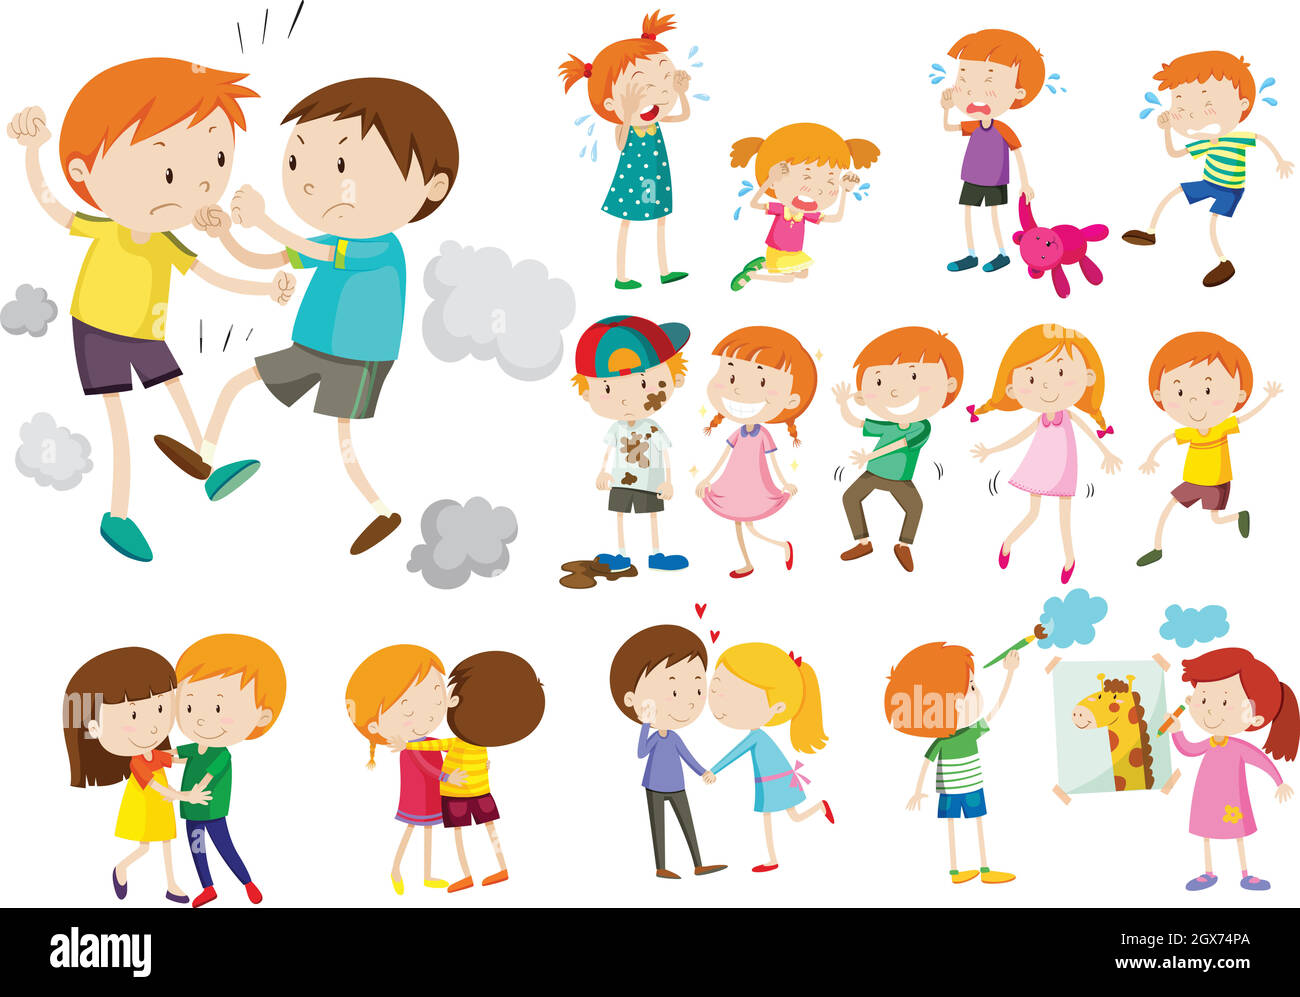 Boys and girls in different actions Stock Vector